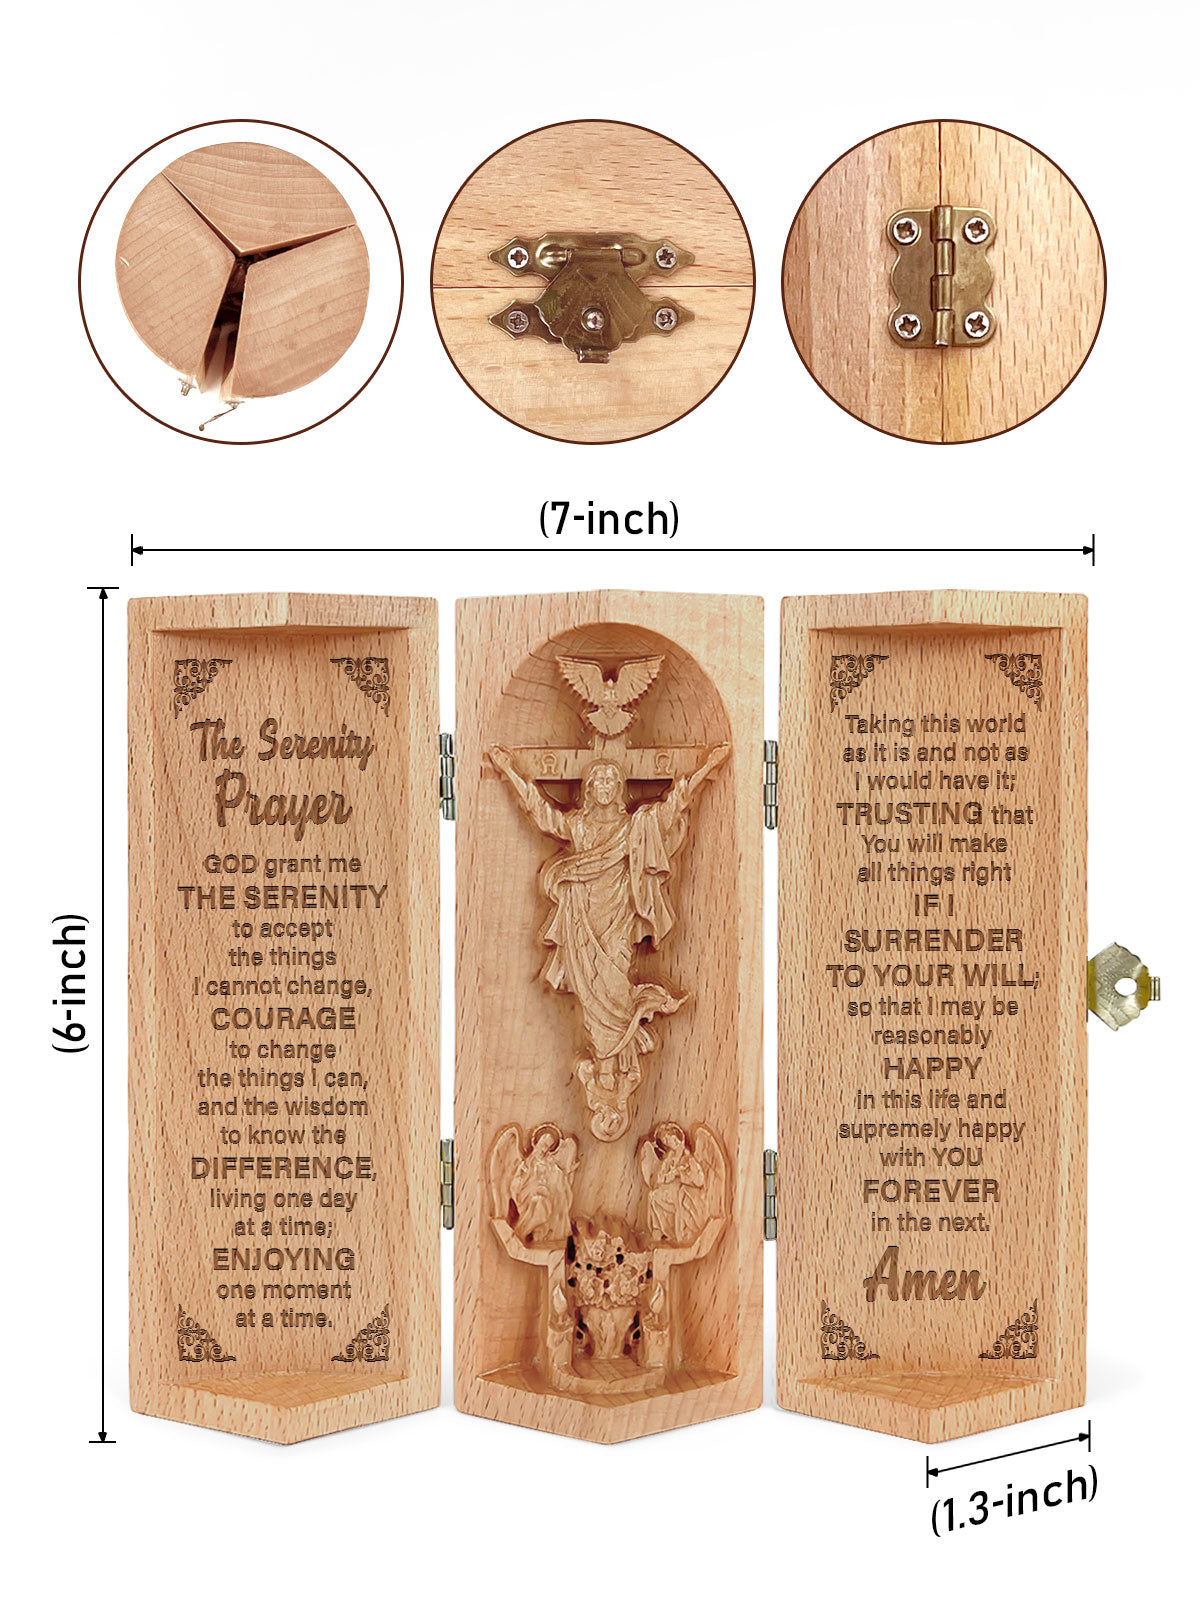 The Serenity Prayer - Openable Wooden Cylinder Sculpture of Jesus Christ